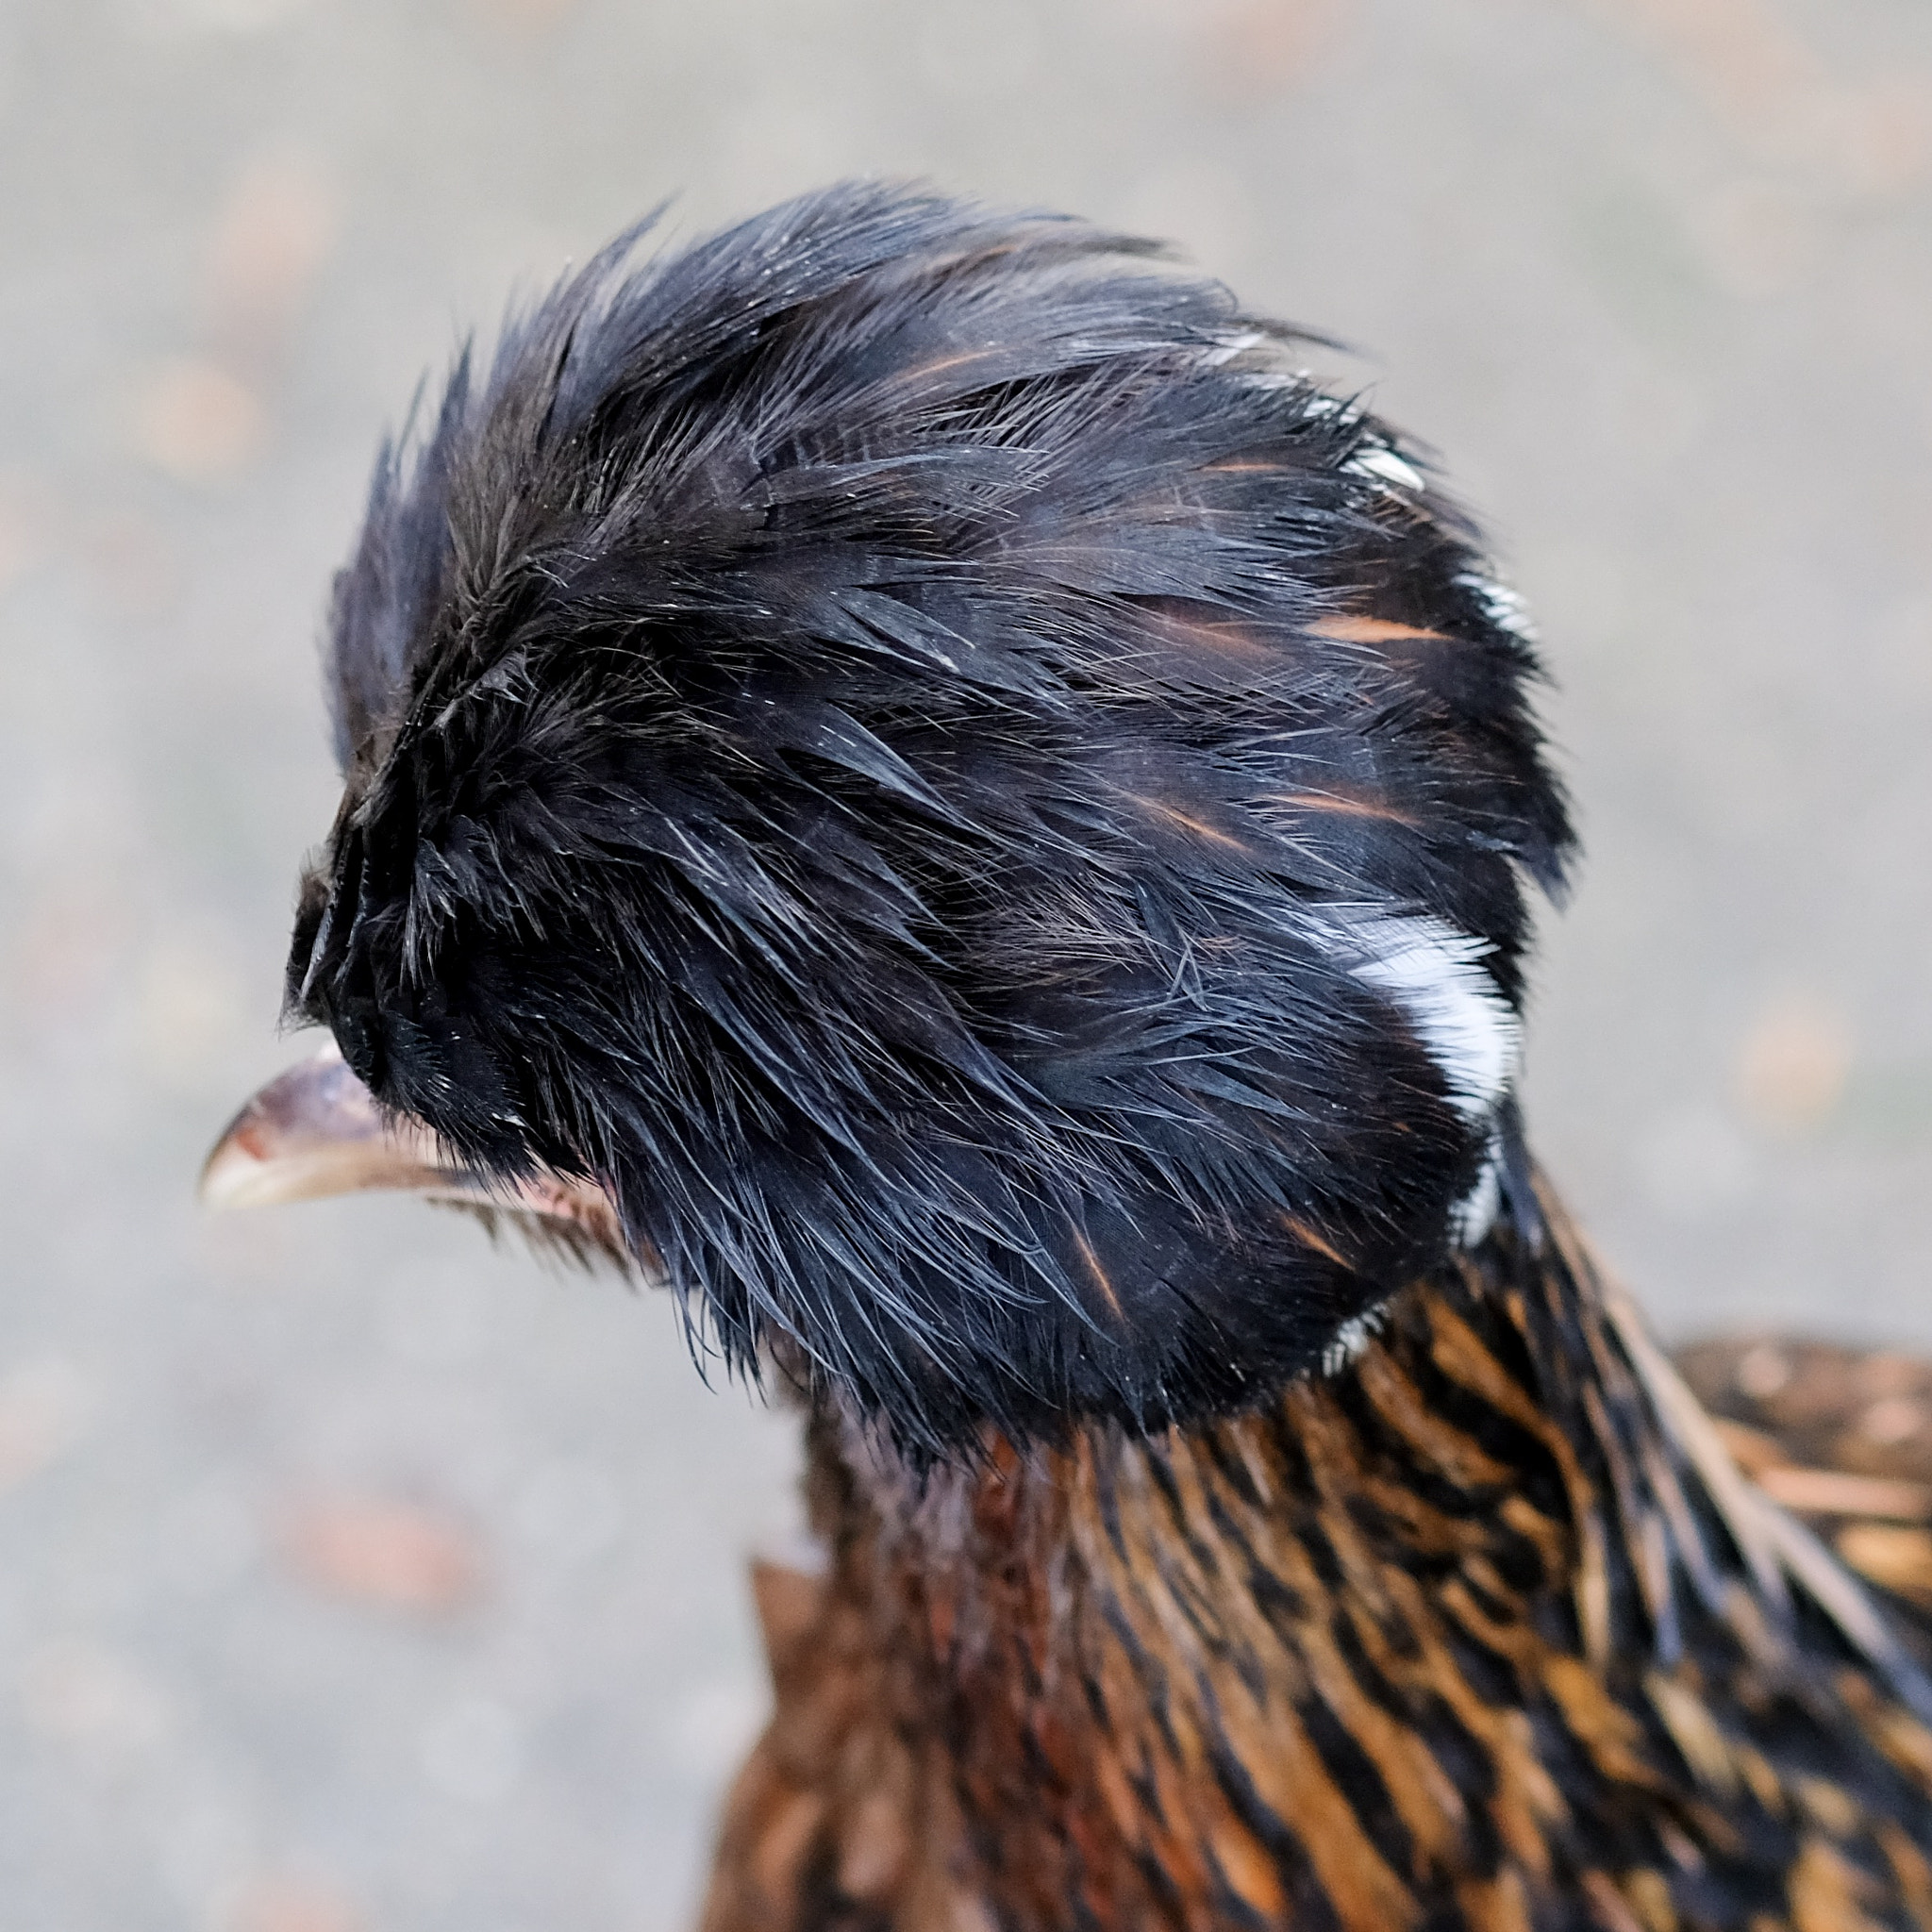 Fujifilm X-T2 sample photo. Stylin'. this chicken is very proud of its head of "hair"! photography